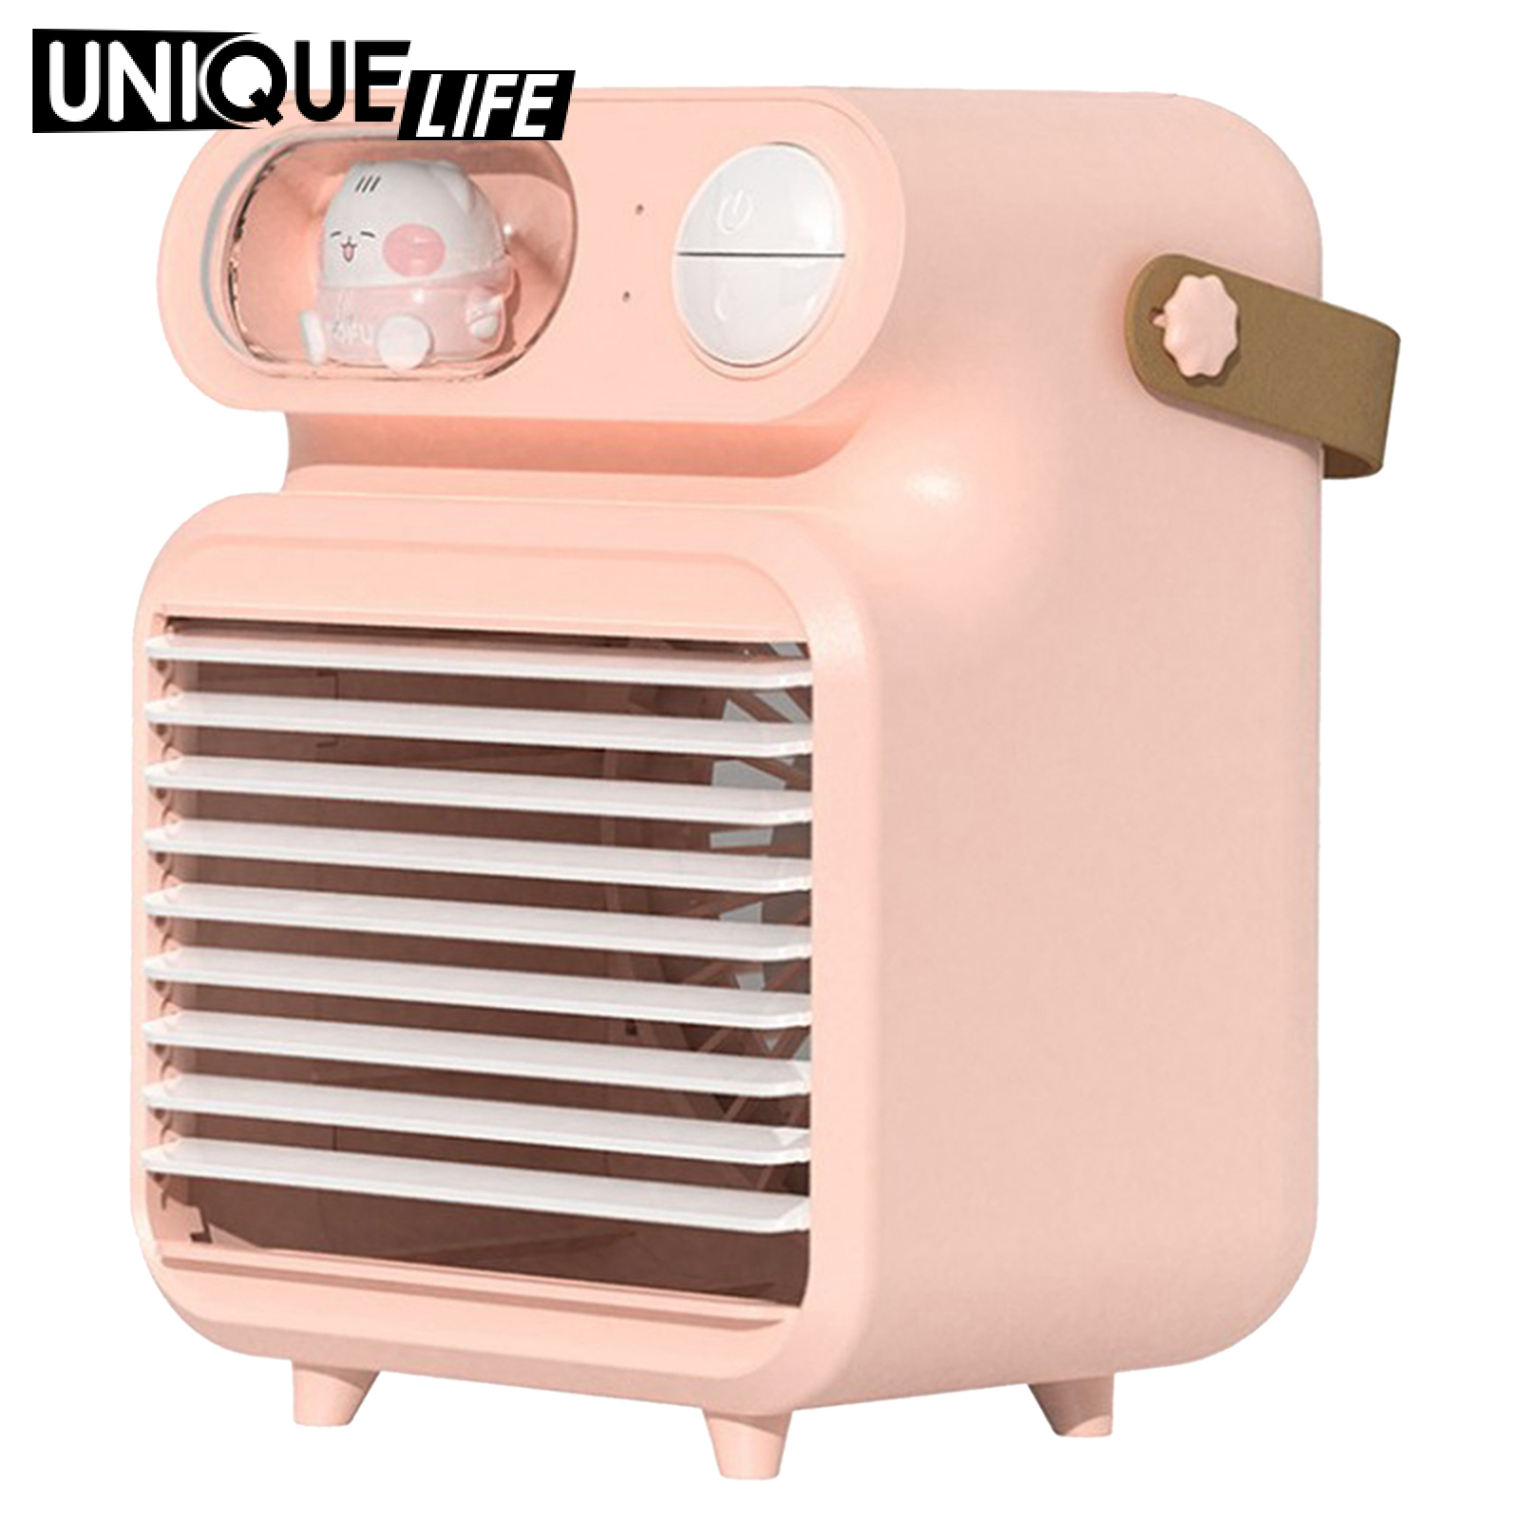 [Unique Life]Portable Air Conditioner Fan, Personal Space Mini Evaporative Air Cooler Quiet Desk Fan with Handle, Humidifier Misting Fan, 3 Speeds, with LED Light